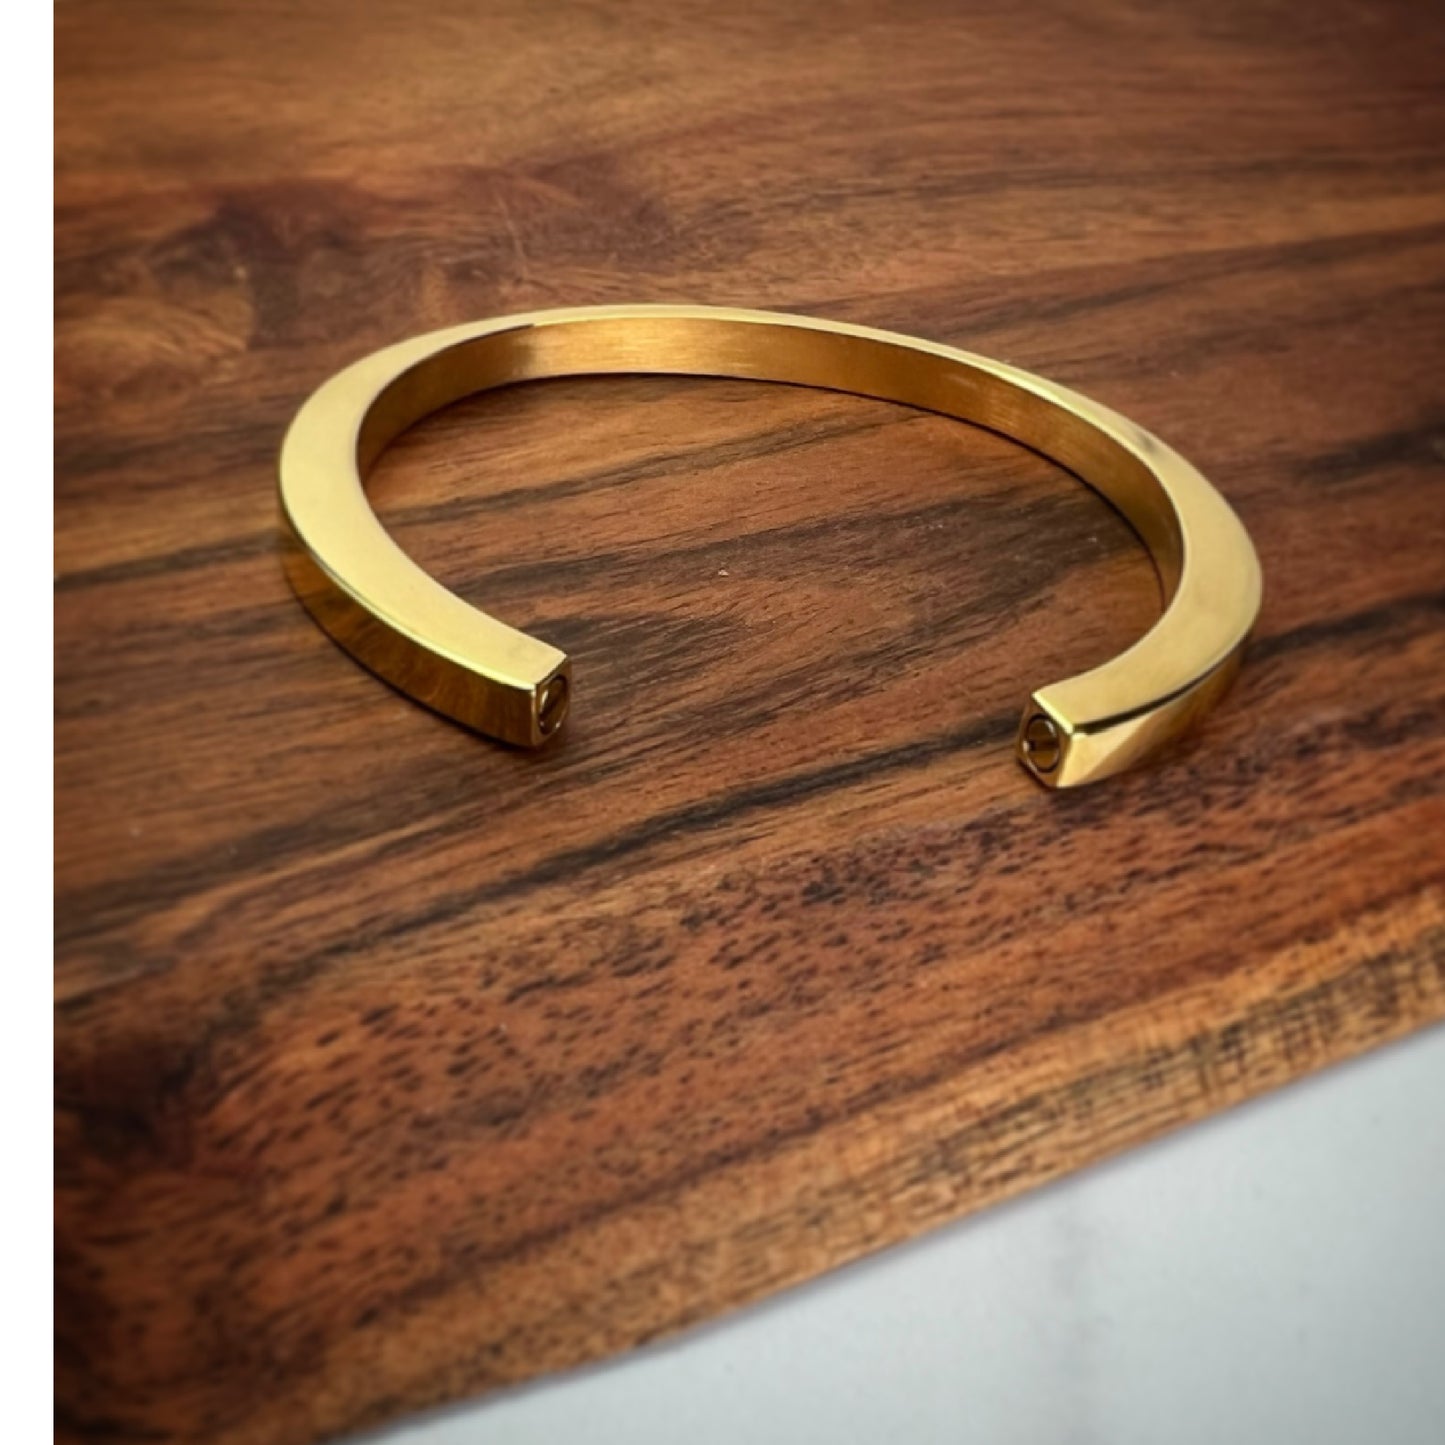 Gold Urn Bracelet for Human or Pet Ashes for Him and Her | Cuff Bracelet for Men Women | Cremation Jewelry | Memorial Jewelry